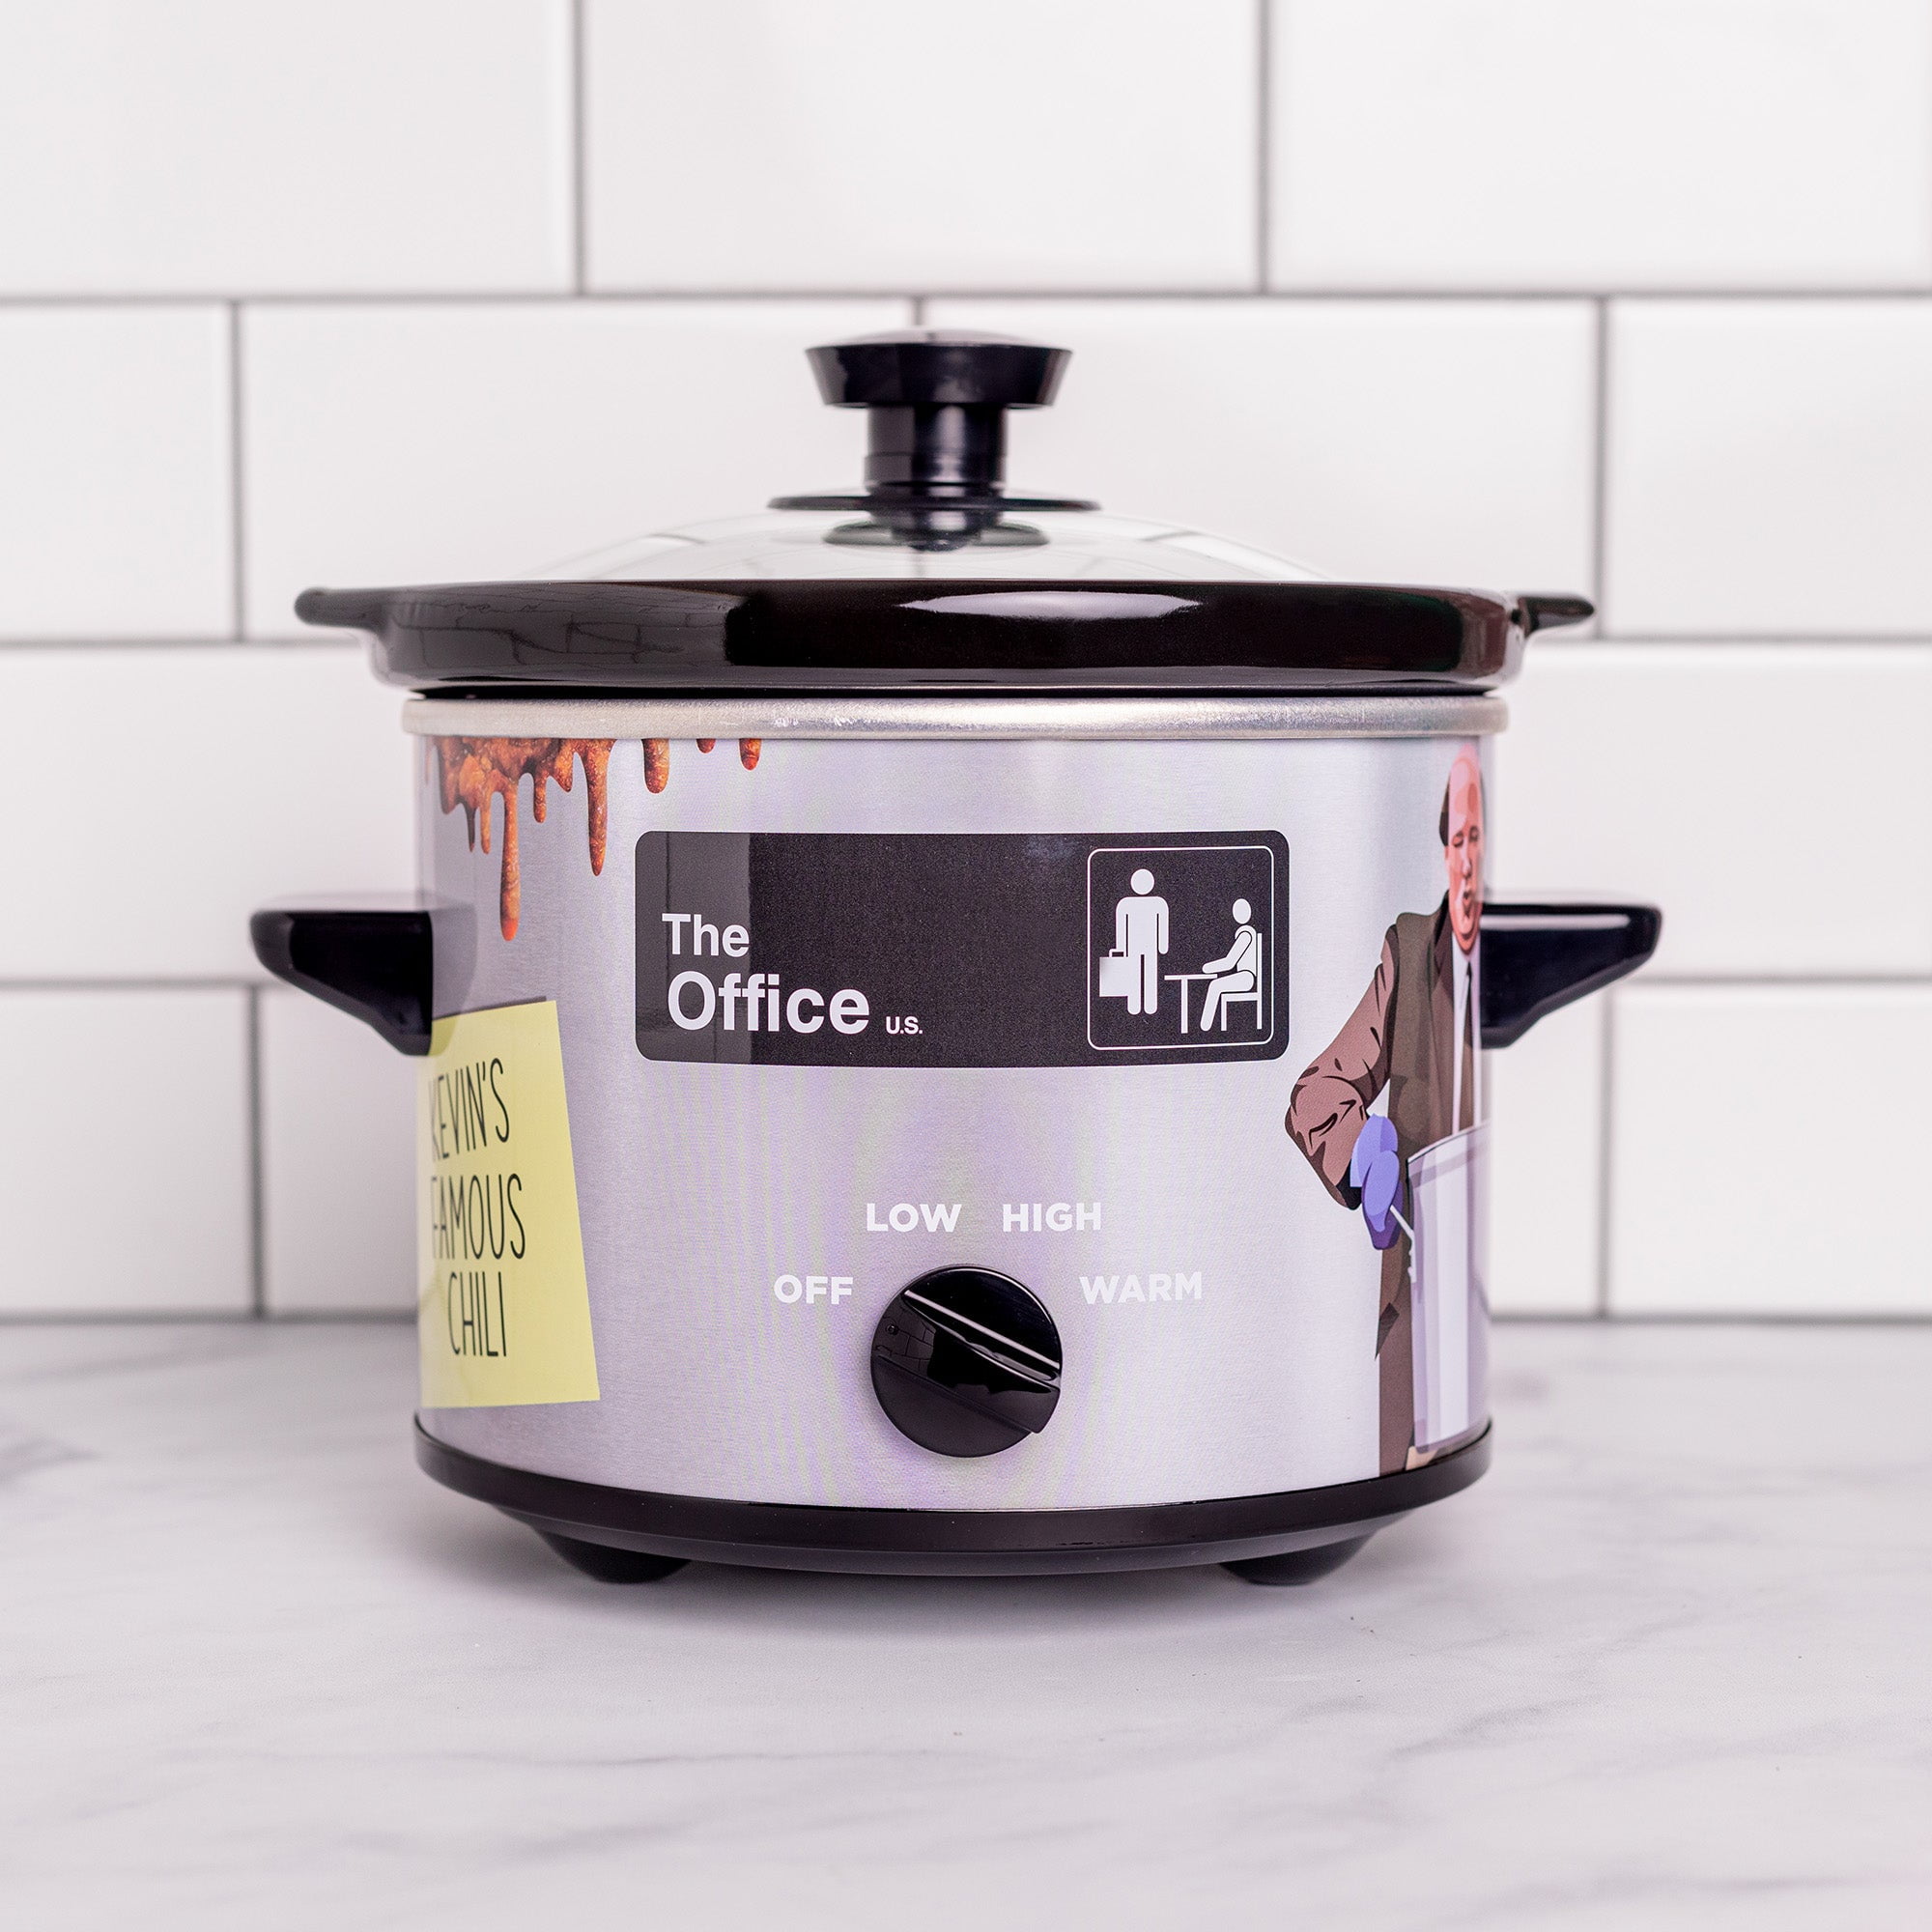 The Biggest Crock-Pot Mystery Finally Solved!